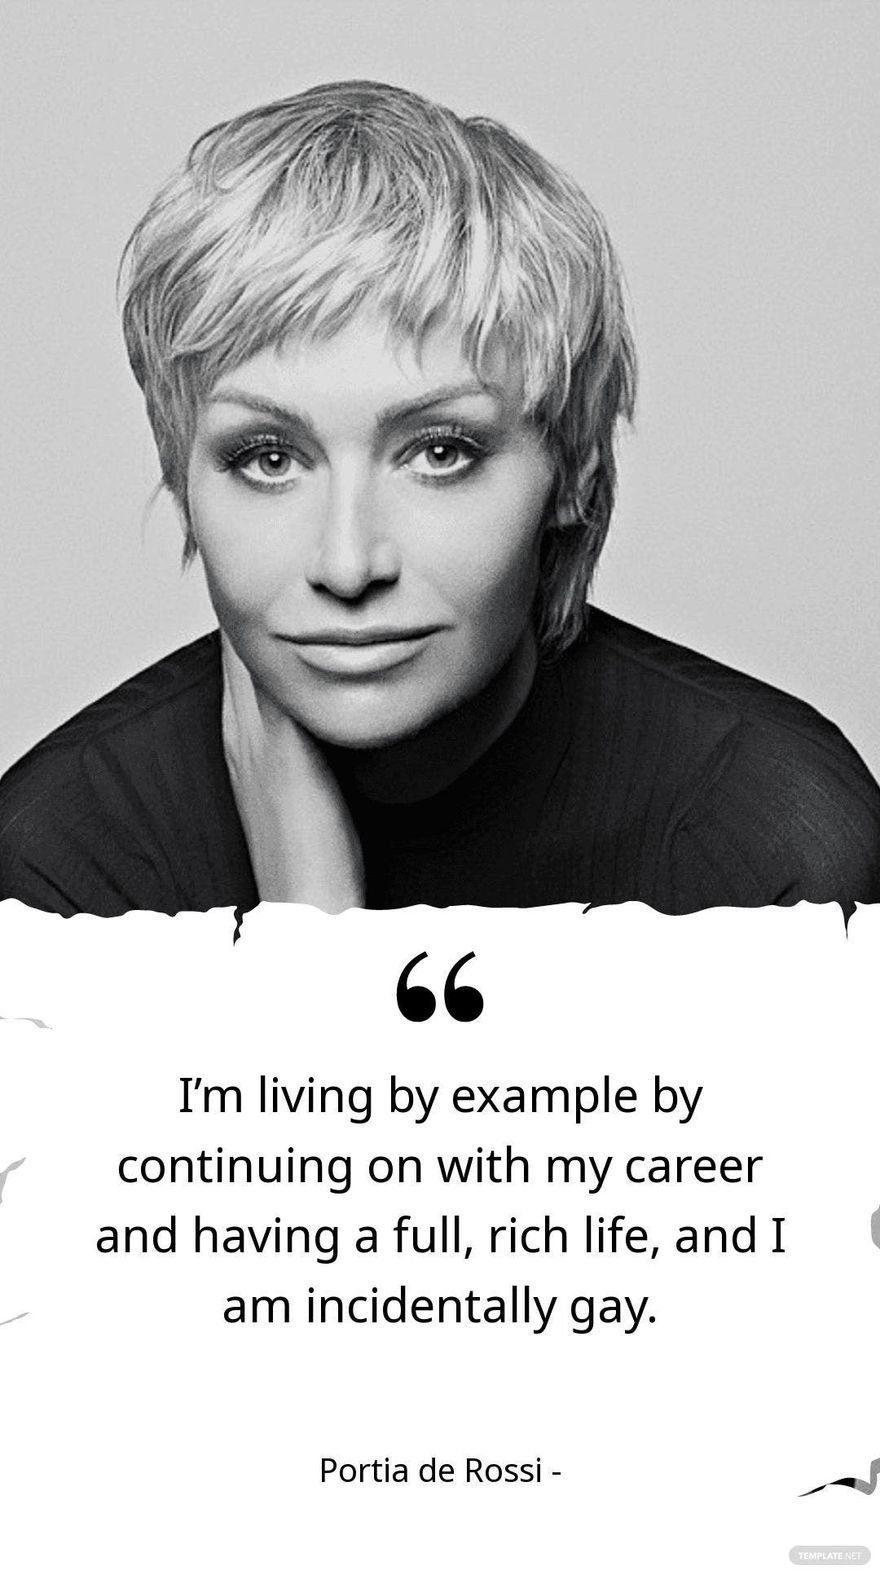 Free Portia de Rossi - I’m living by example by continuing on with my career and having a full, rich life, and I am incidentally gay.